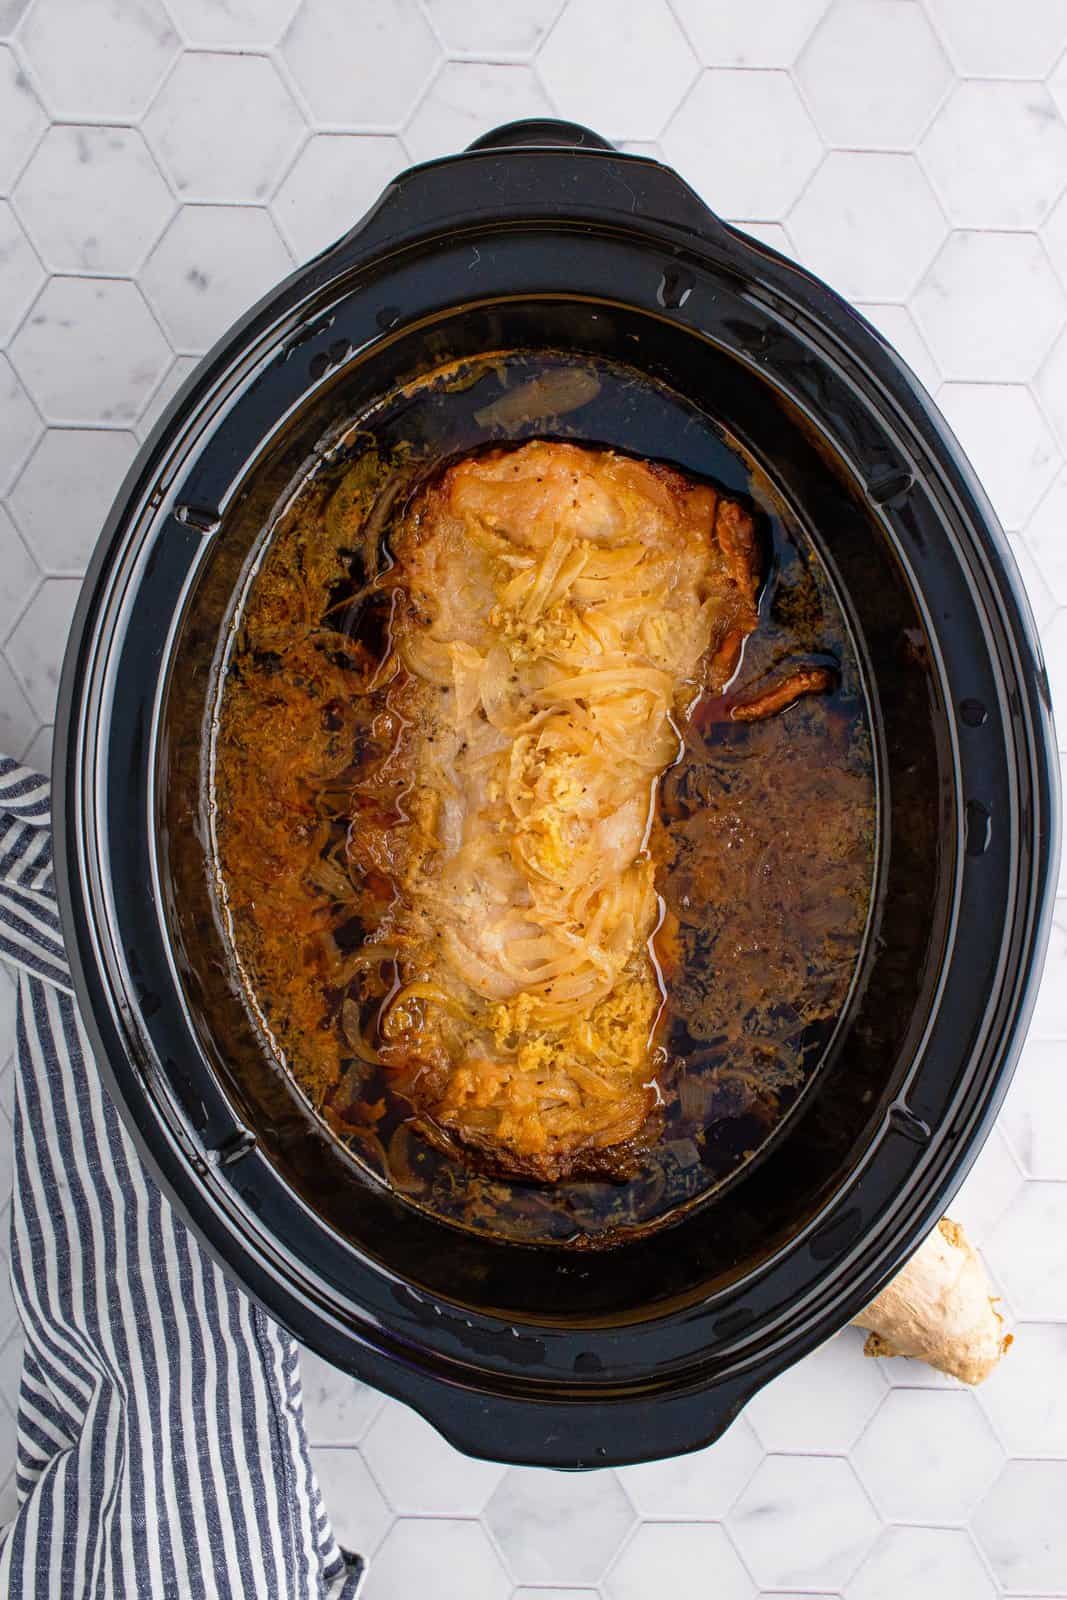 Finished pork loin in crock pot with gravy.